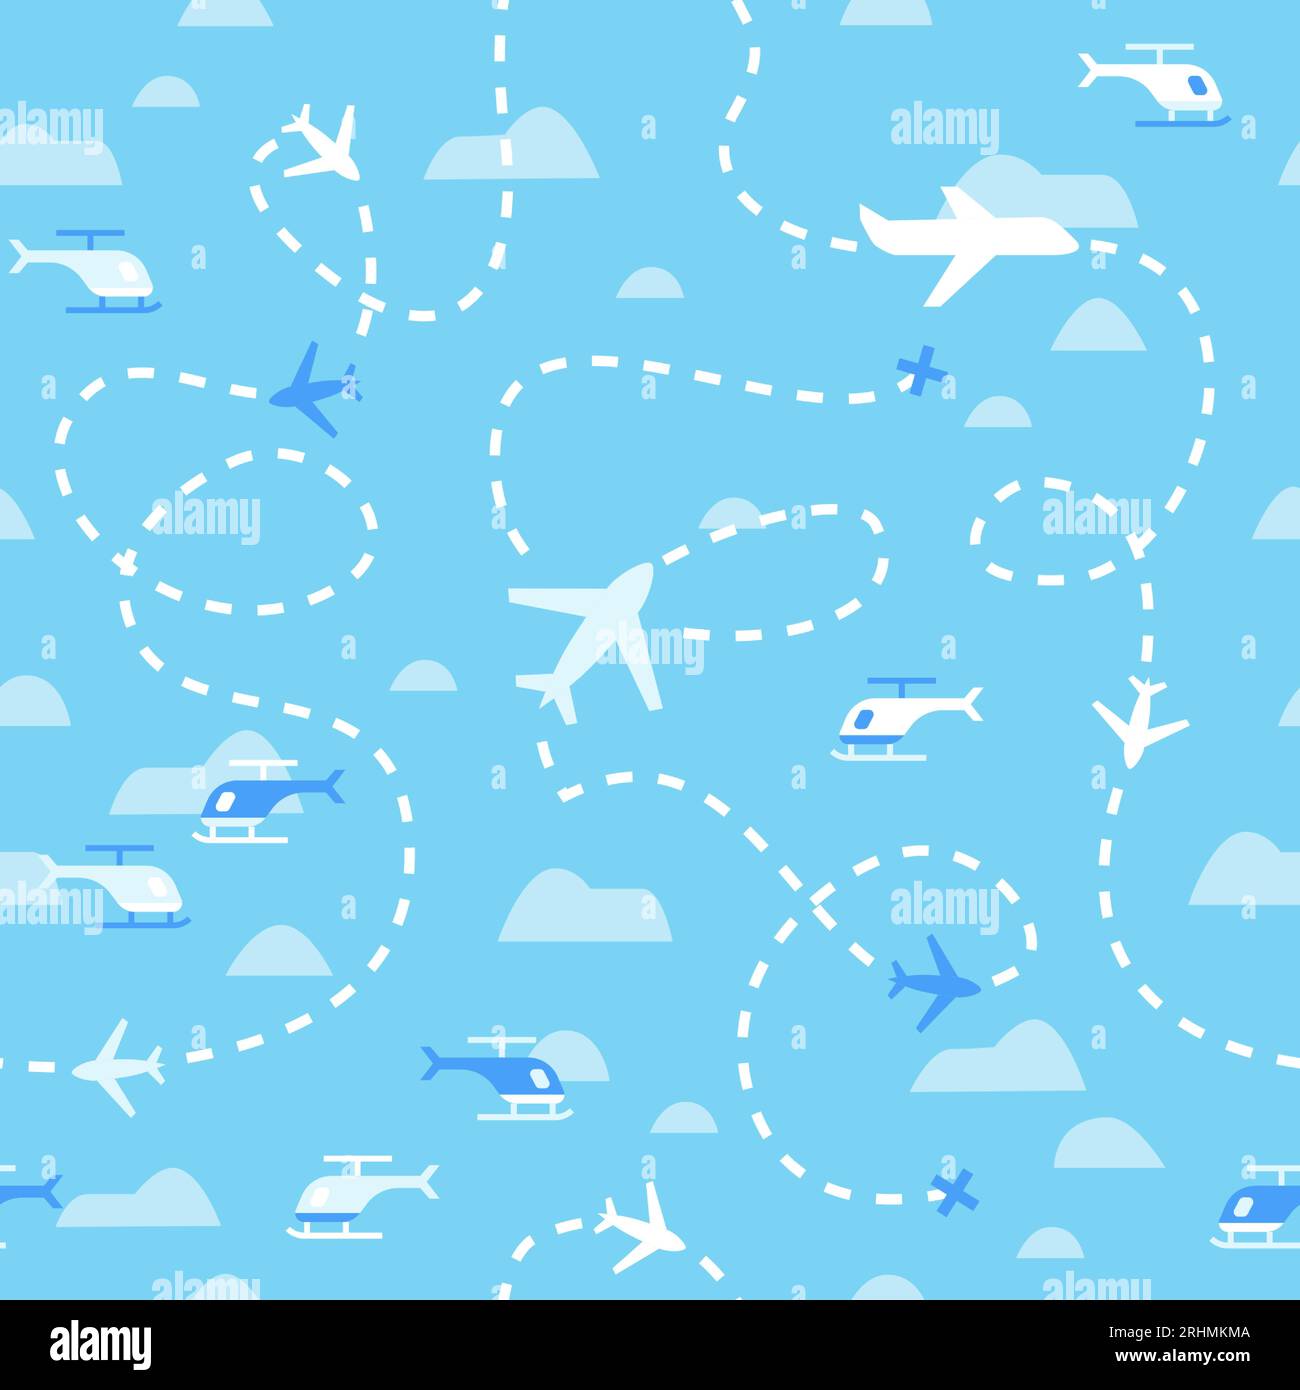 Airport Planes Seamless Pattern Stock Vector